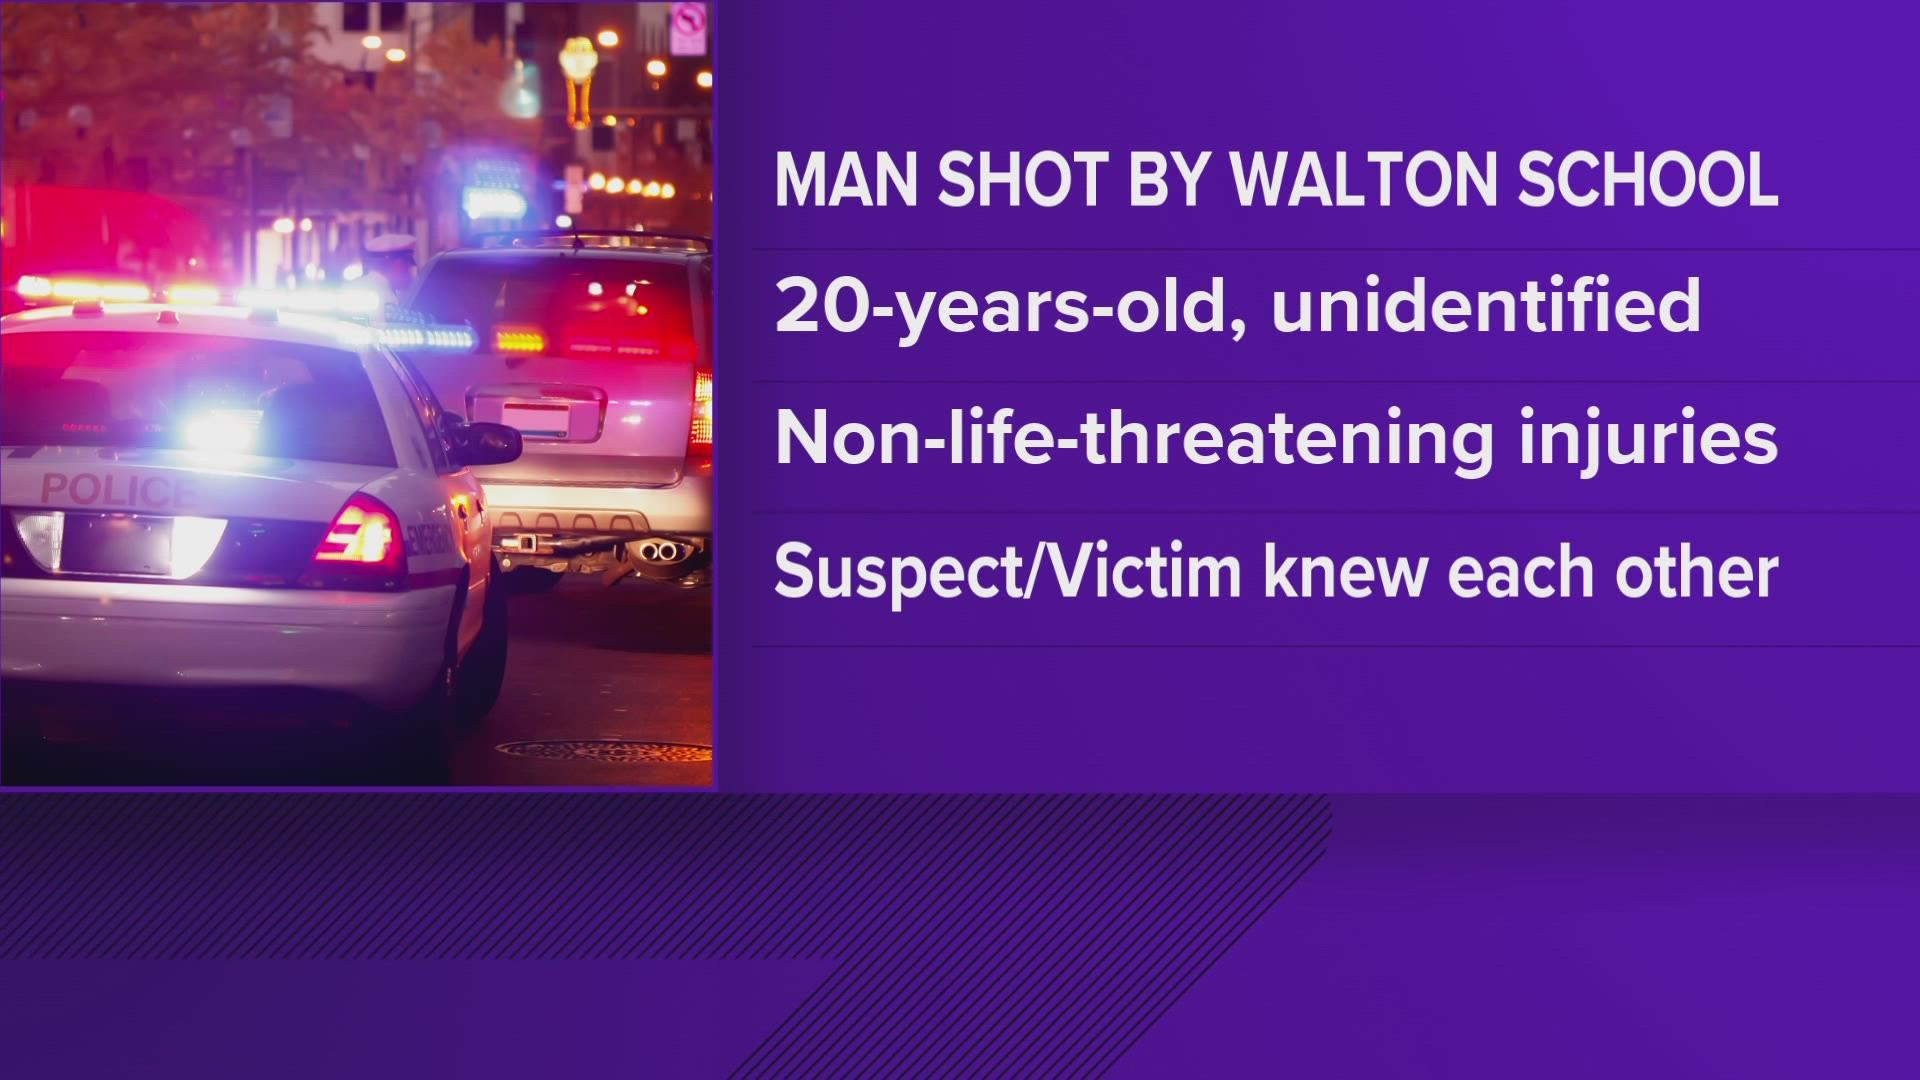 According to a release, a 20-year-old man was shot around 2 a.m. near Walton School in Auburn. Police say there is no threat to the students or staff at the school.